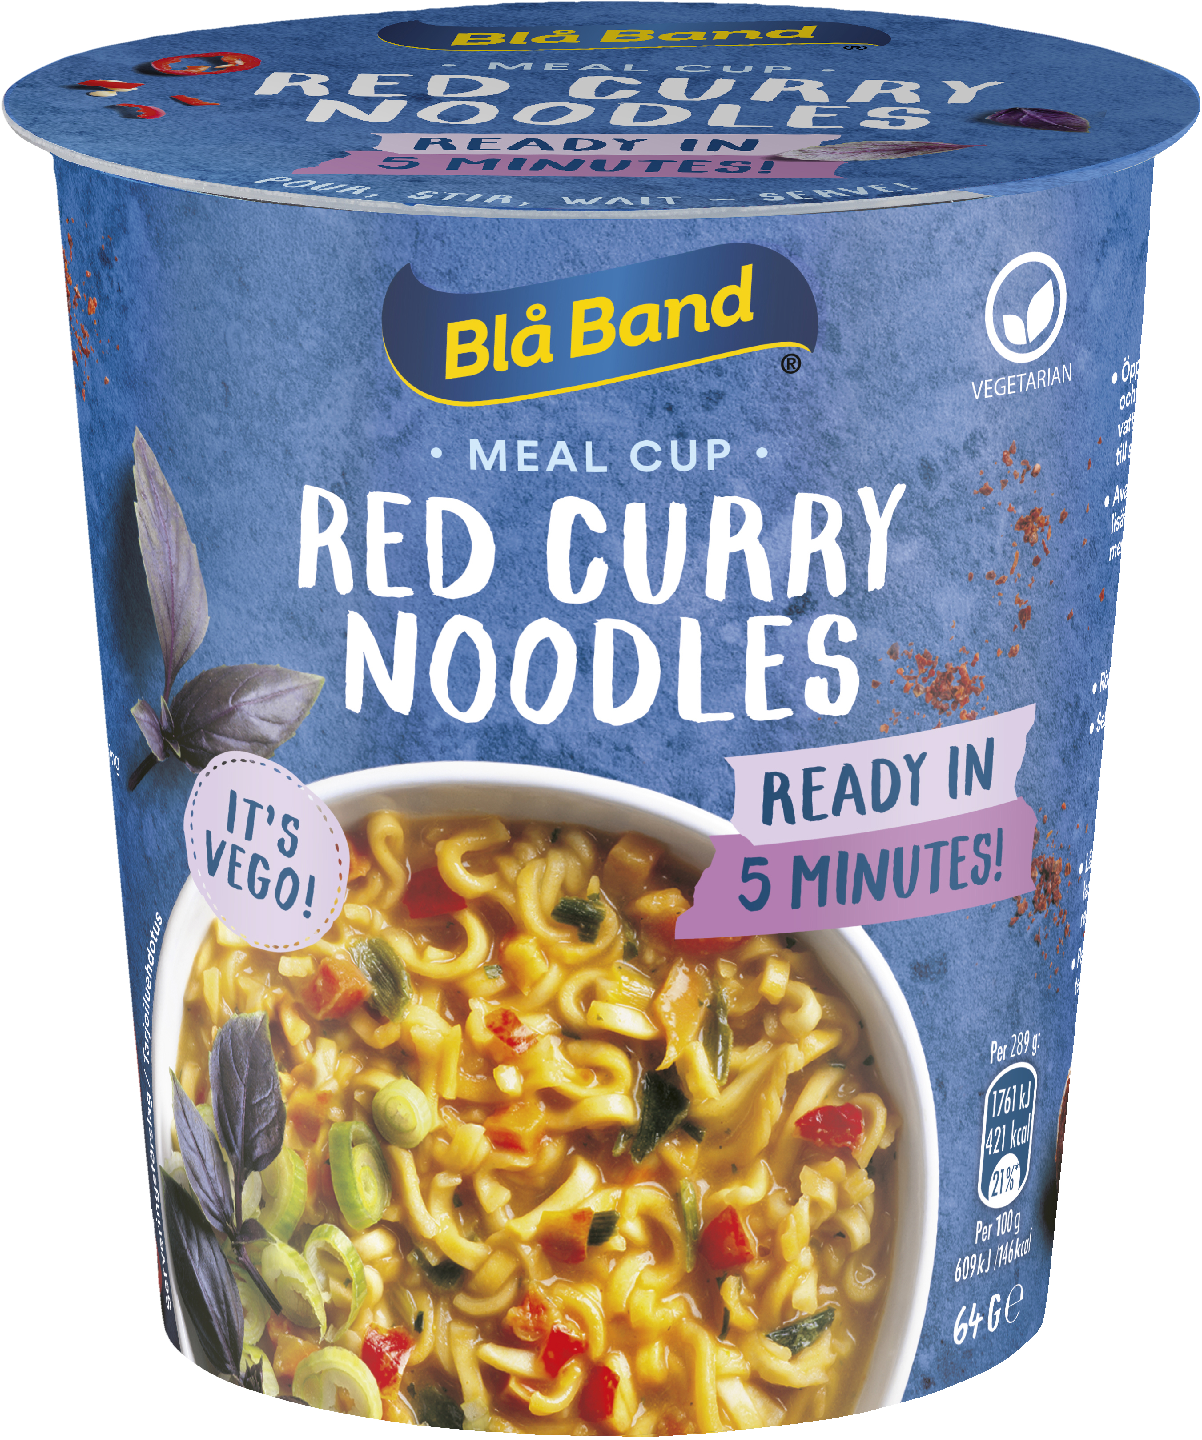 Blå Band Meal Cup Red Curry Noodles Curry-Chili-Nuudeliateria 64g